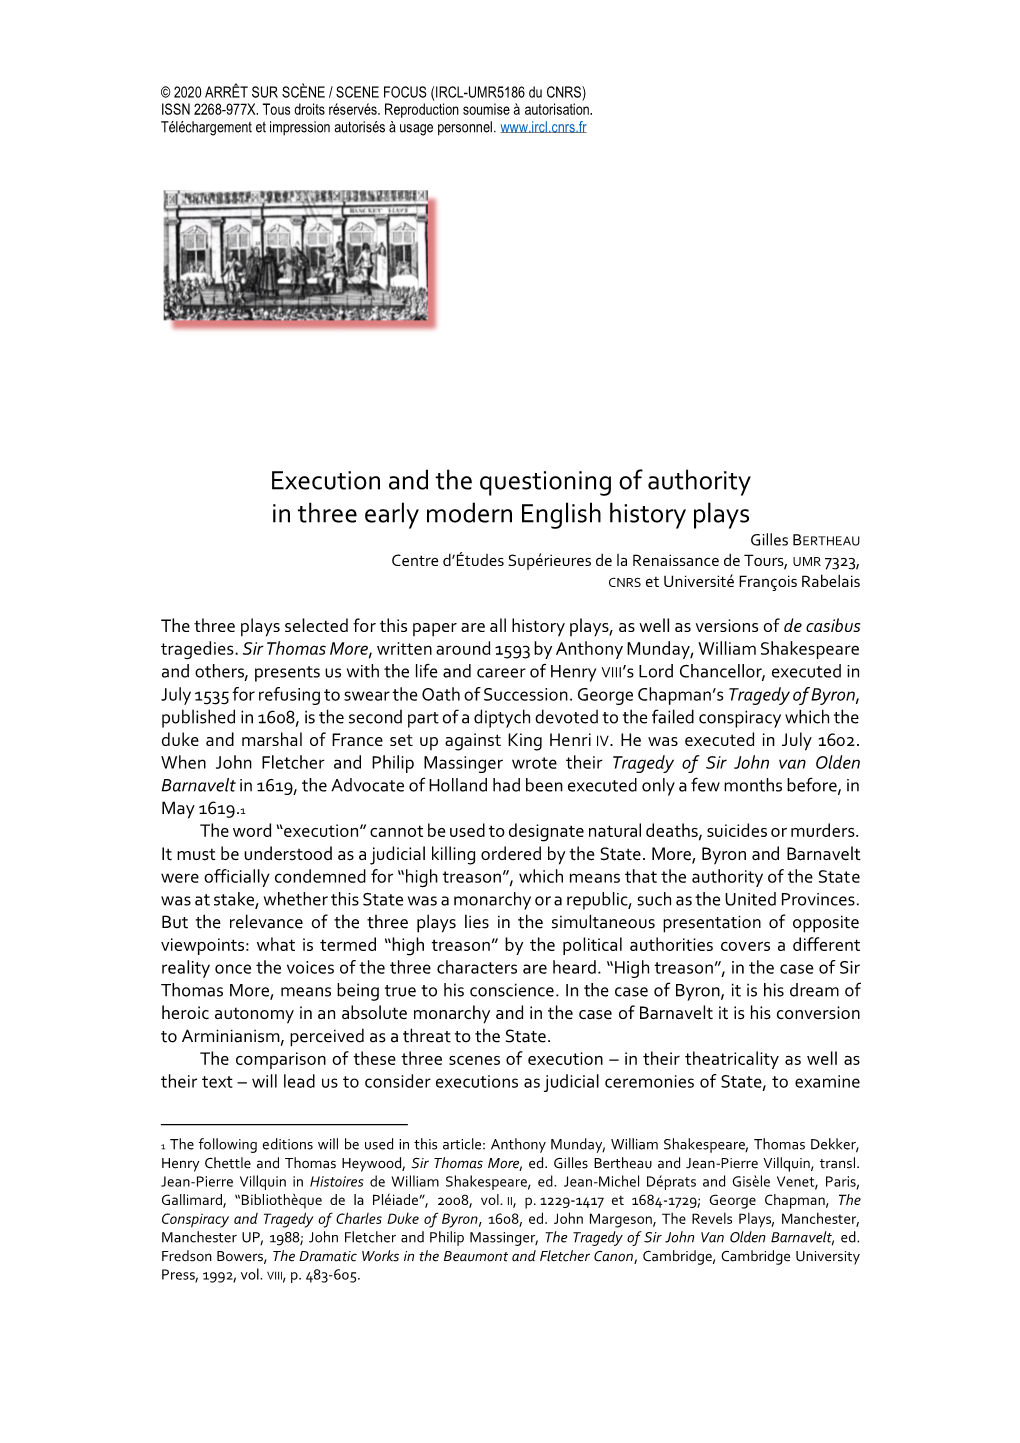 Execution and the Questioning of Authority in Three Early